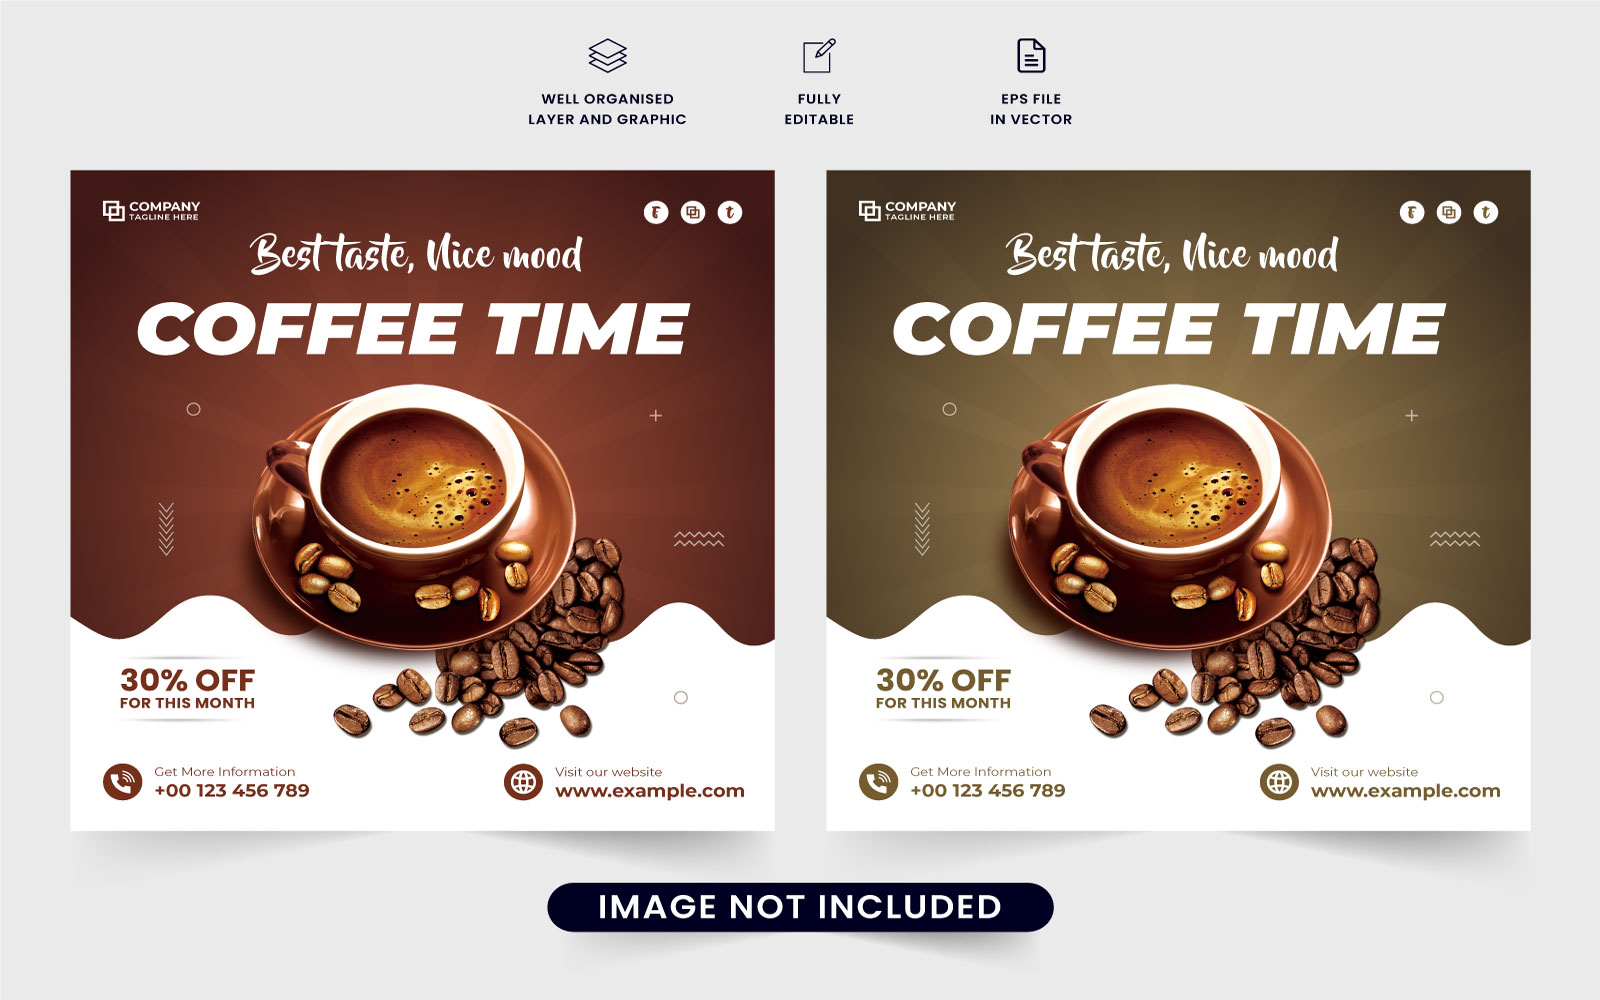 Coffee promotion template vector design